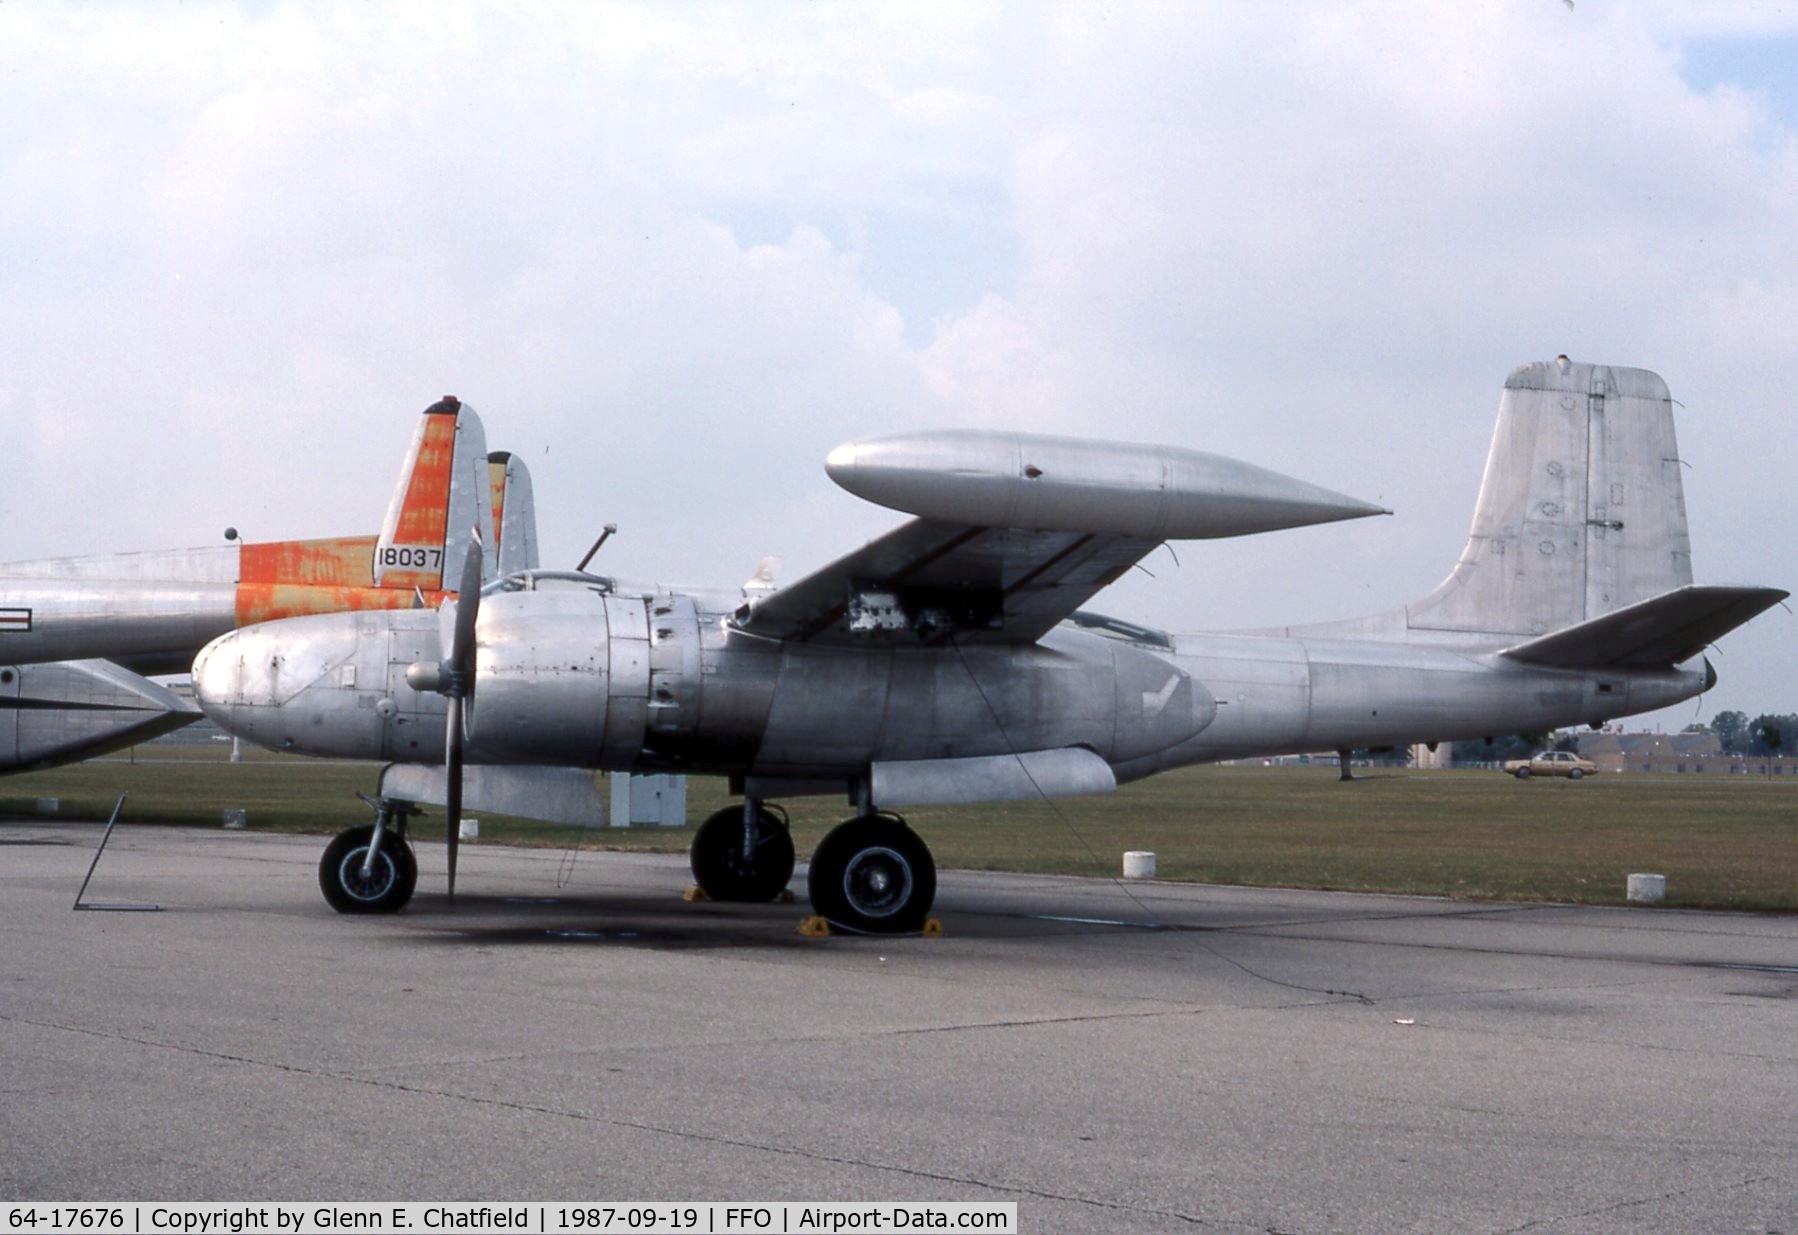 64-17676, 1971 Douglas-On Mark B-26K Counter Invader C/N 7309 (was 41-39596), At the National Museum of the U.S. Air Force. Ex N29939